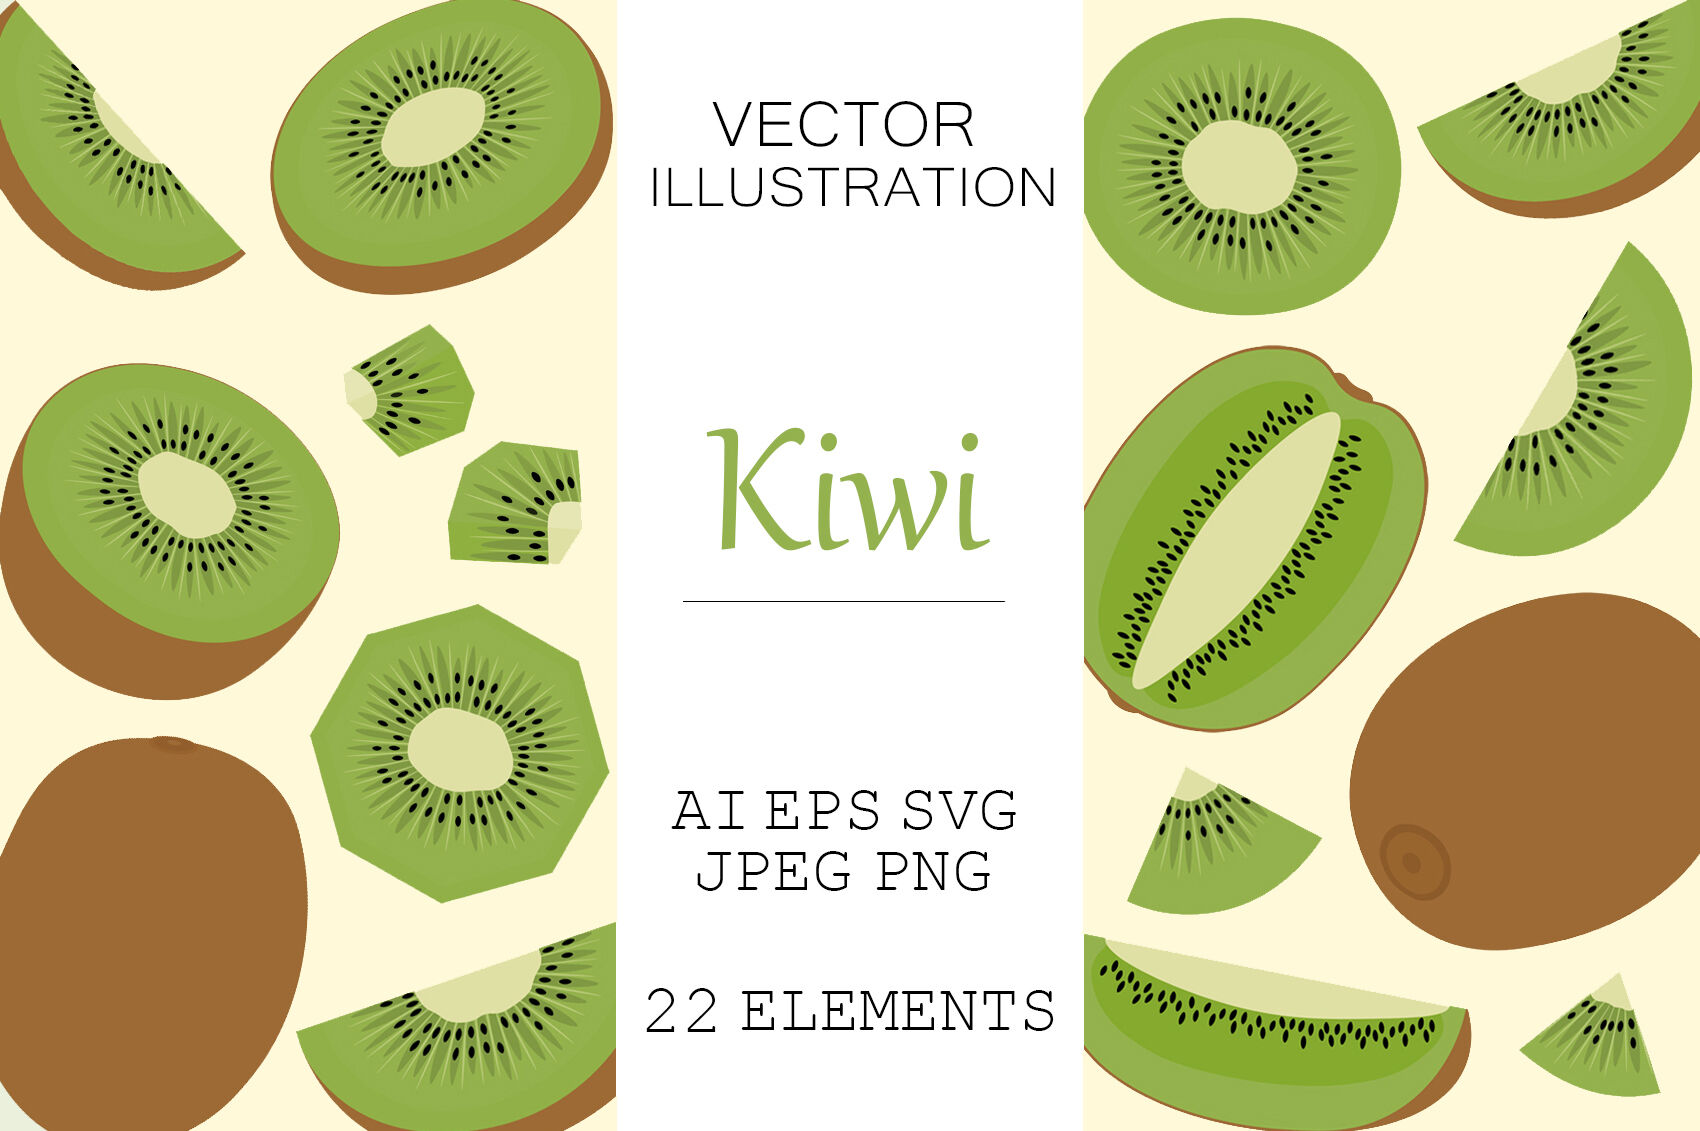 How to draw a kiwi easy || Fruit drawing || Kiwi drawing step by step || -  YouTube